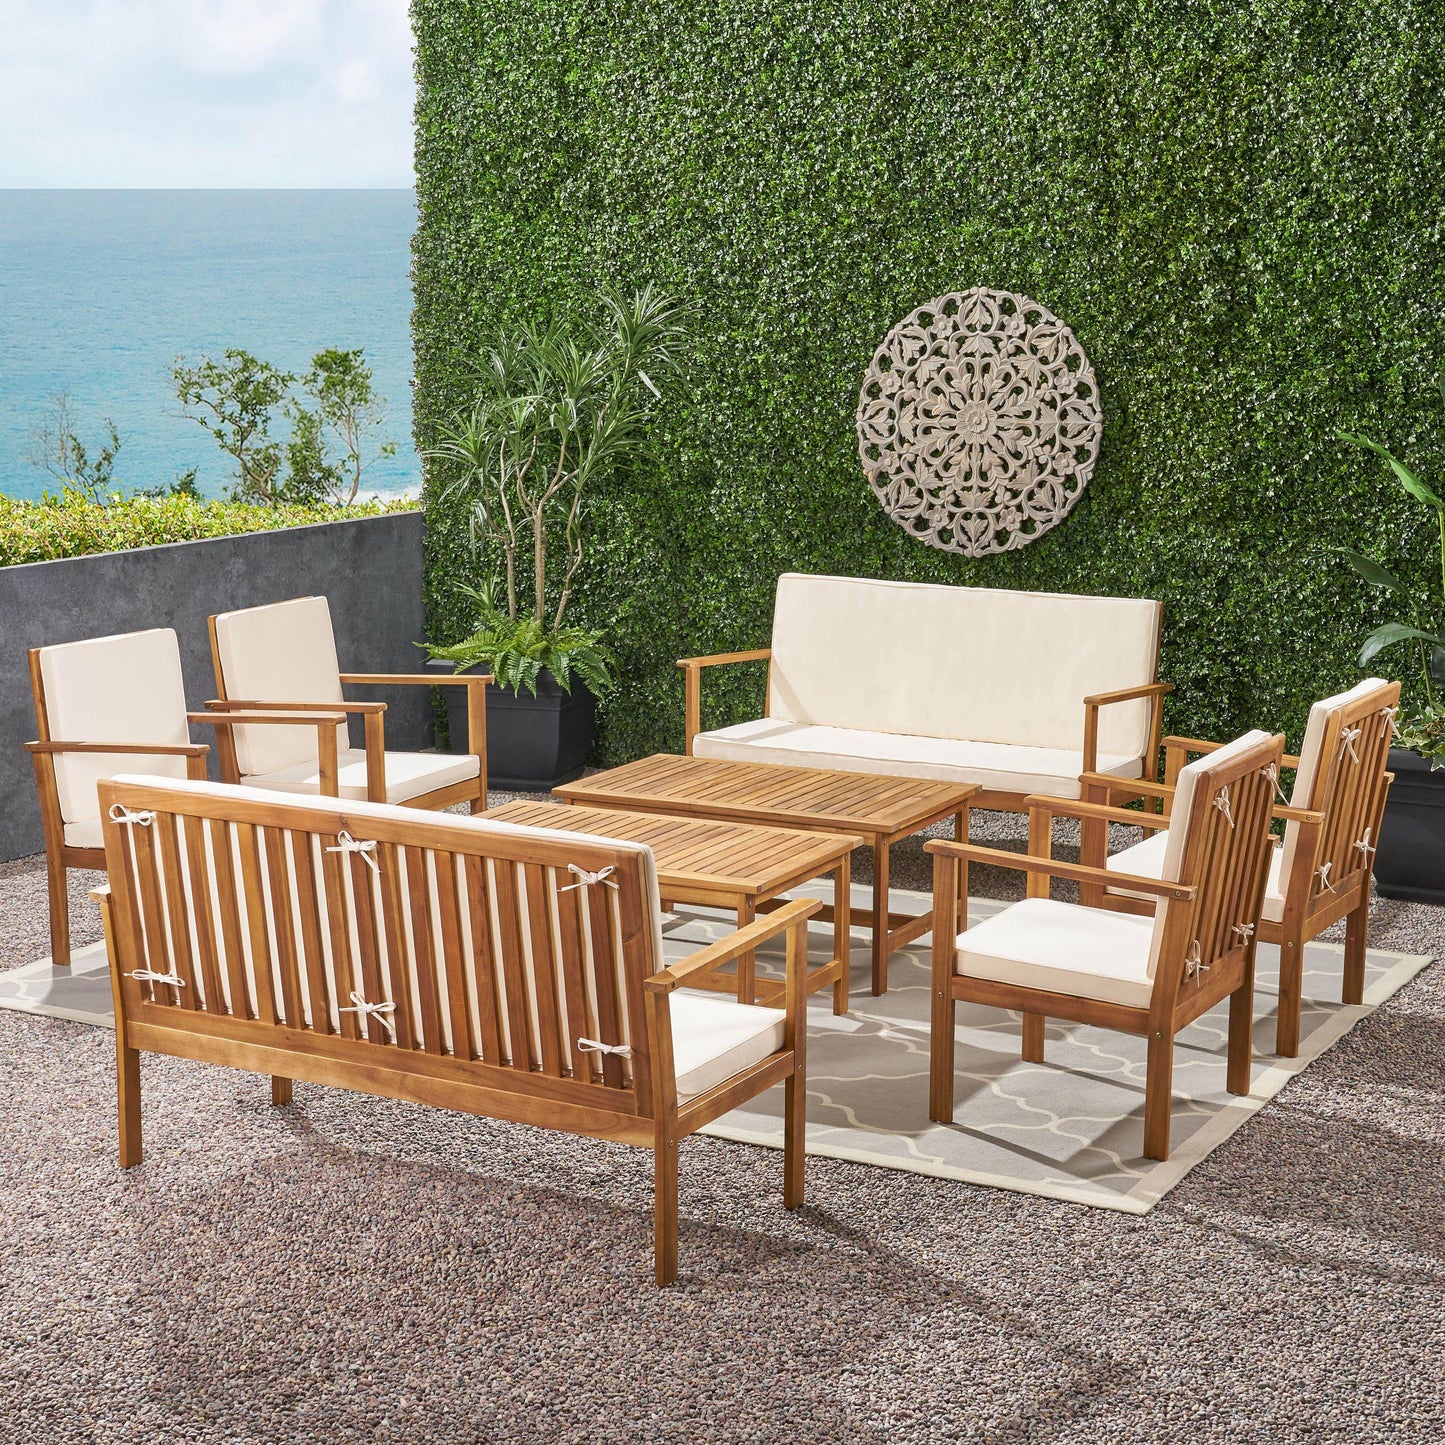 Renata Outdoor Modern Acacia Wood 8 Seater Chat Set with Cushions